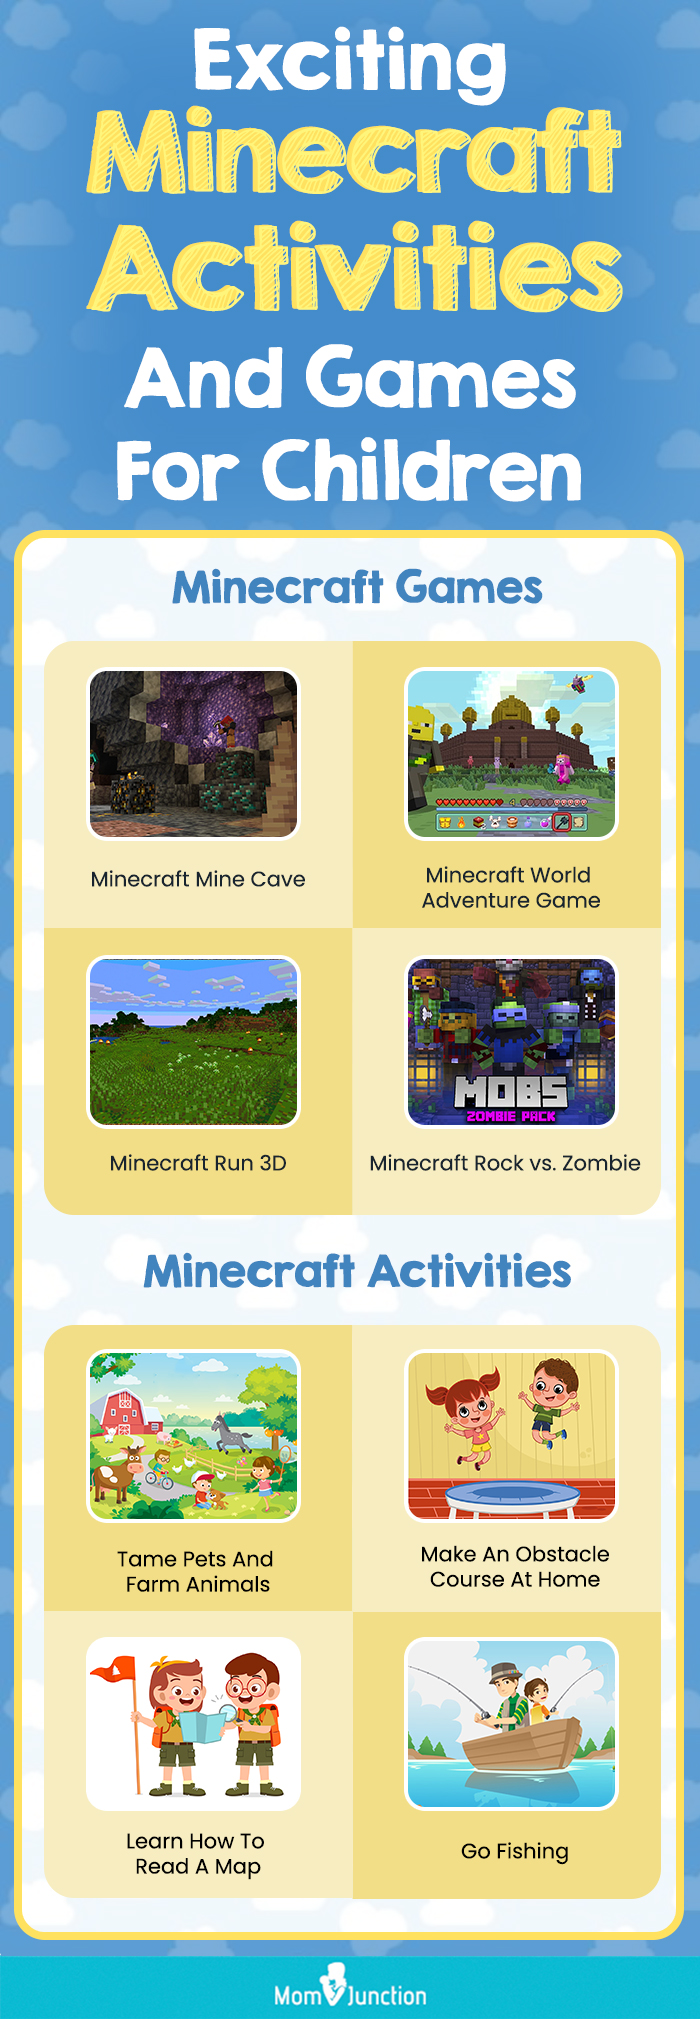 exciting minecraft activities and games for children (infographic)